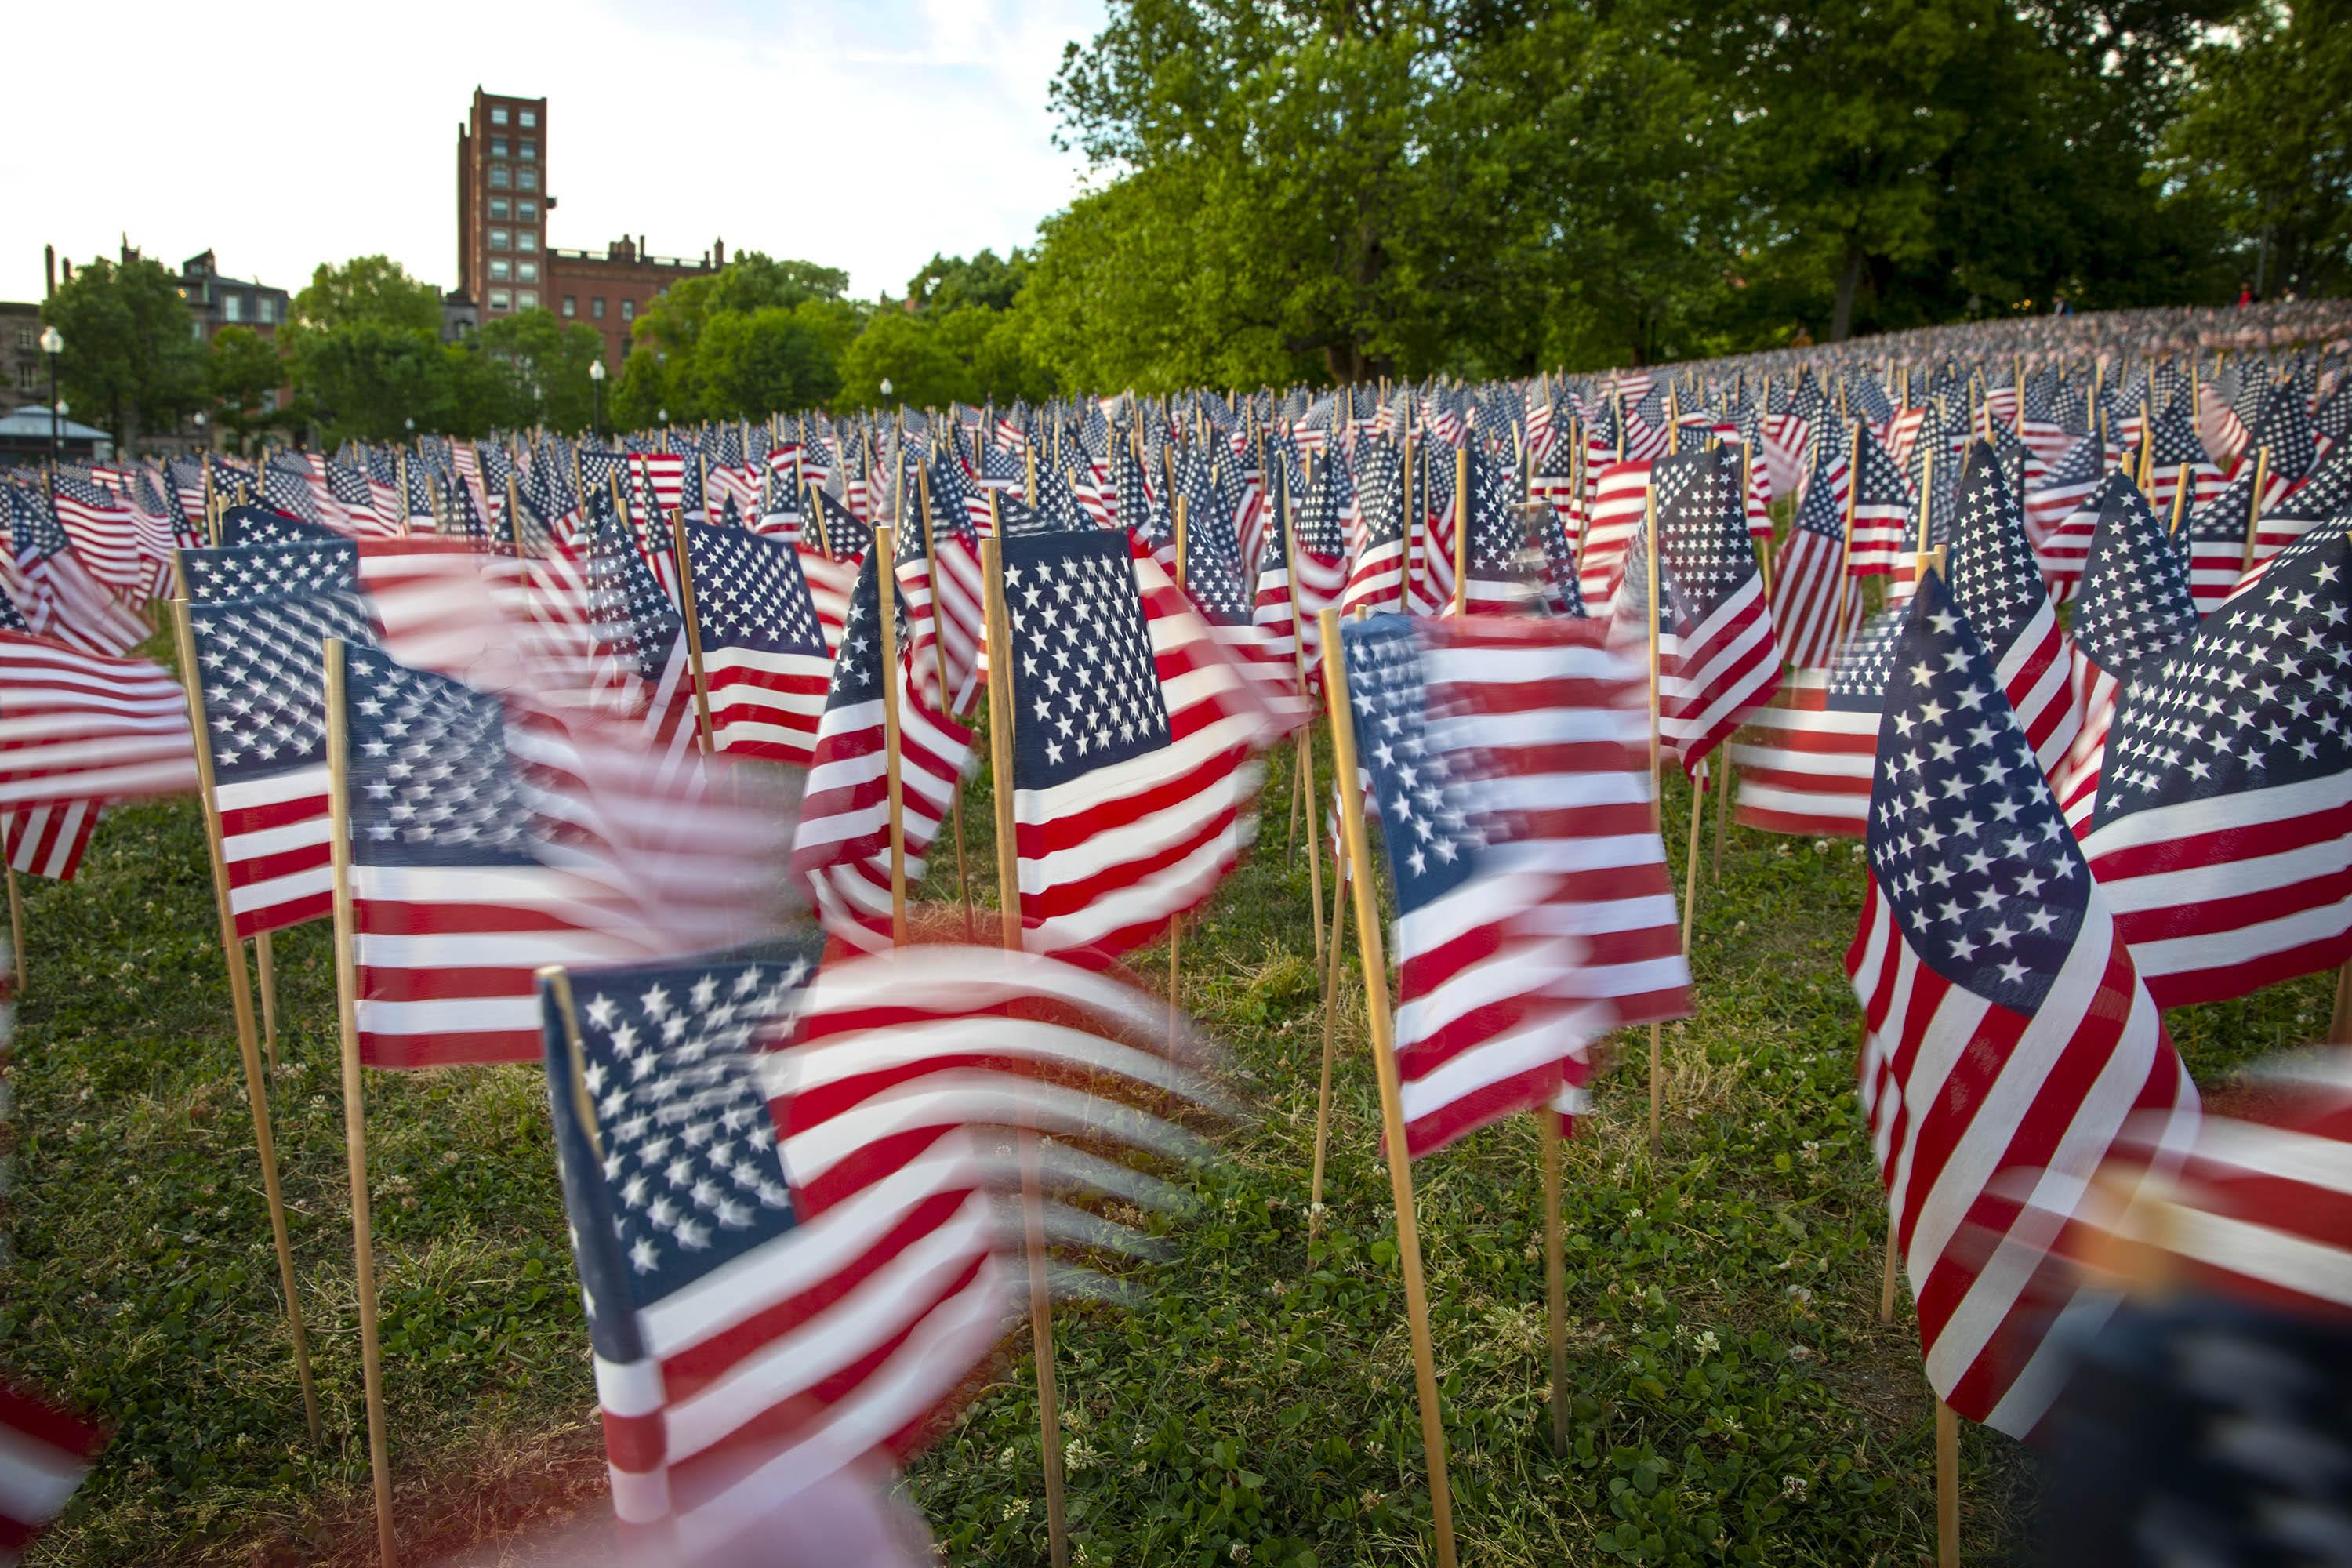 Some of the 37,000 flags, planted in memory of fallen Massachusetts service members, flutter in the breeze on Boston Common. (Robin Lubbock/WBUR)